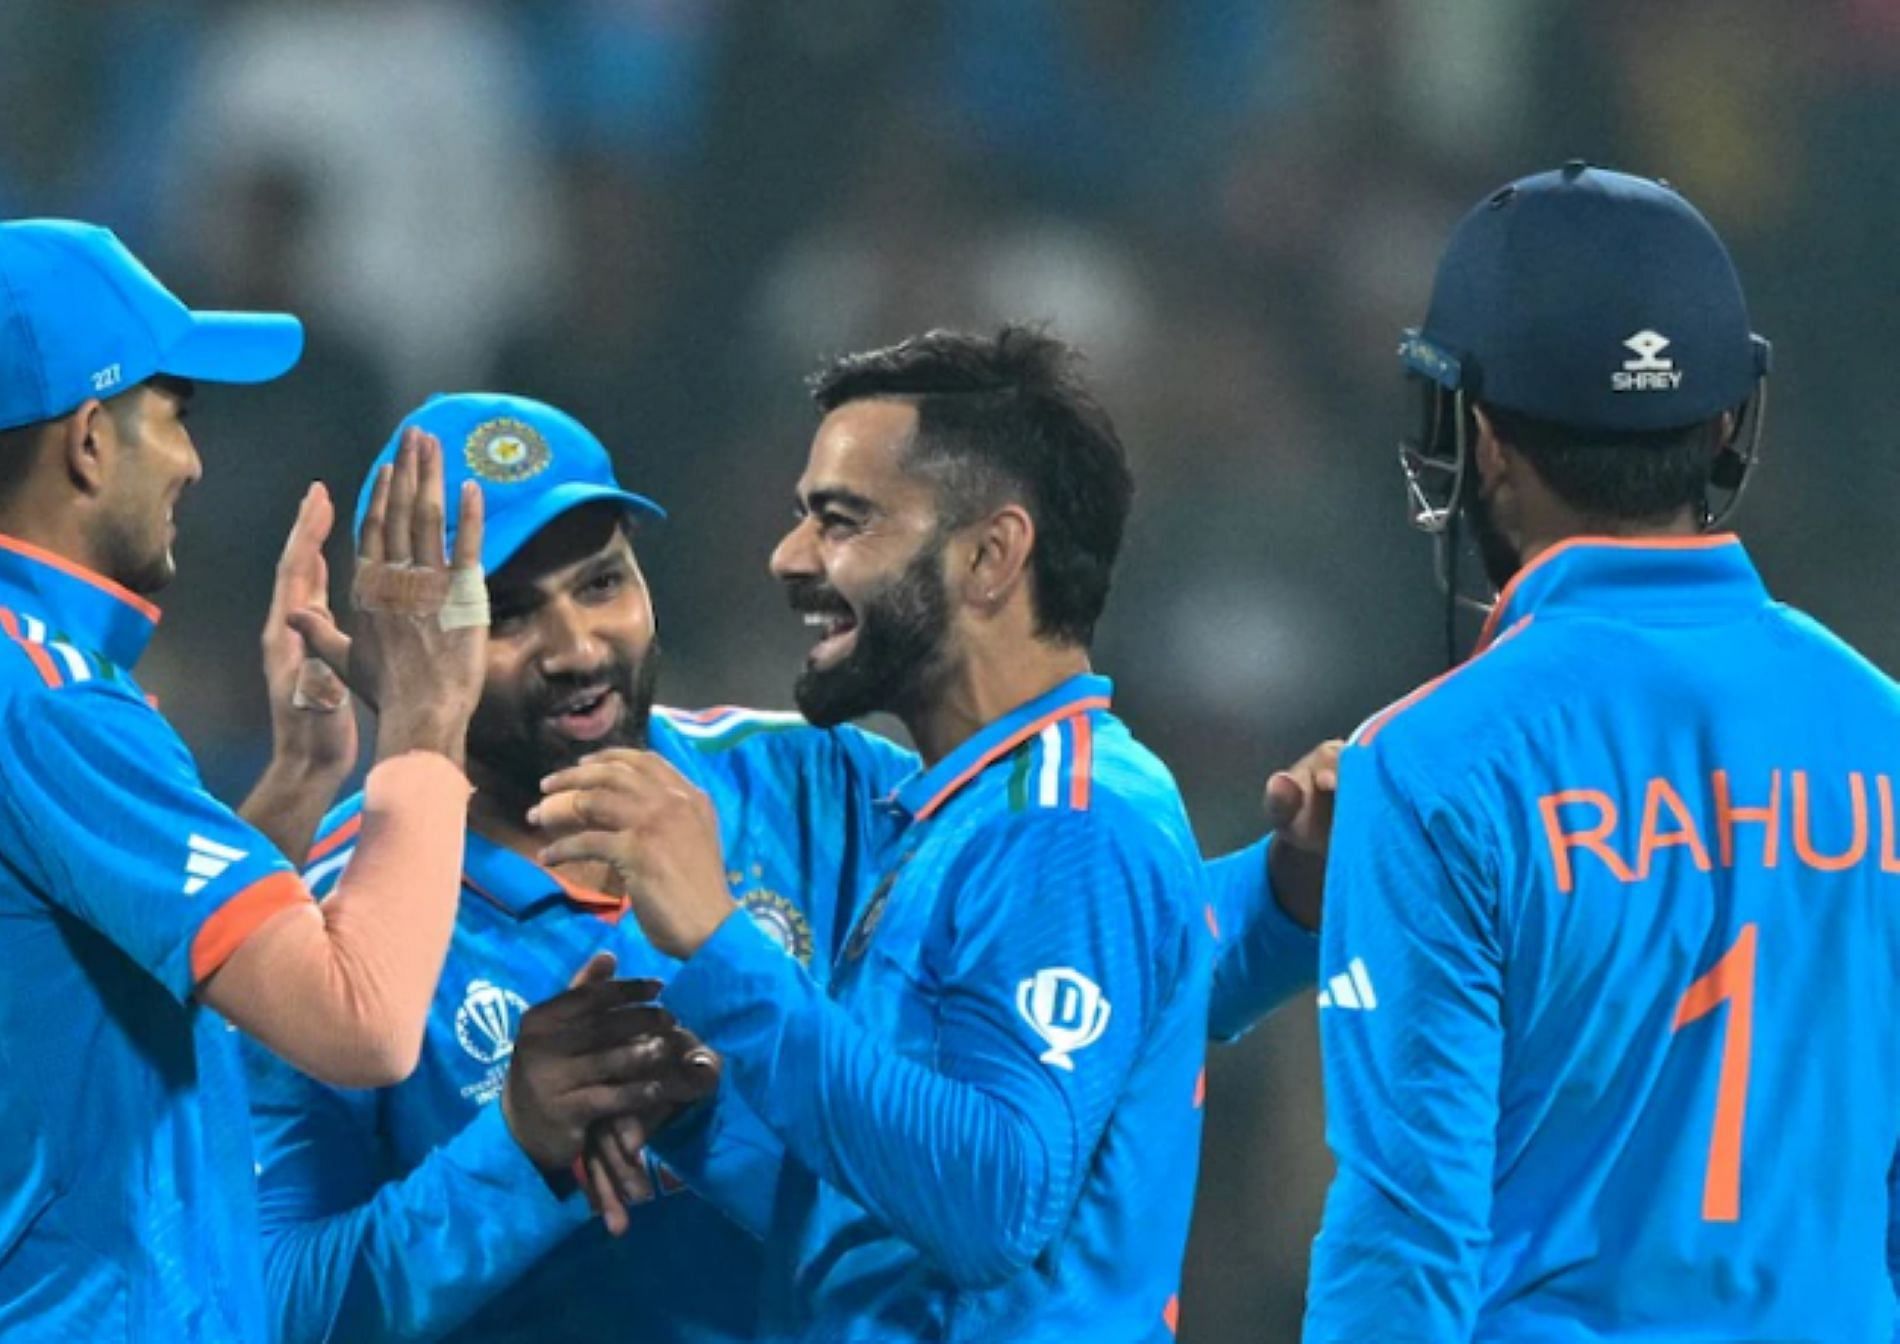 Team India has been in rollicking form through the tournament